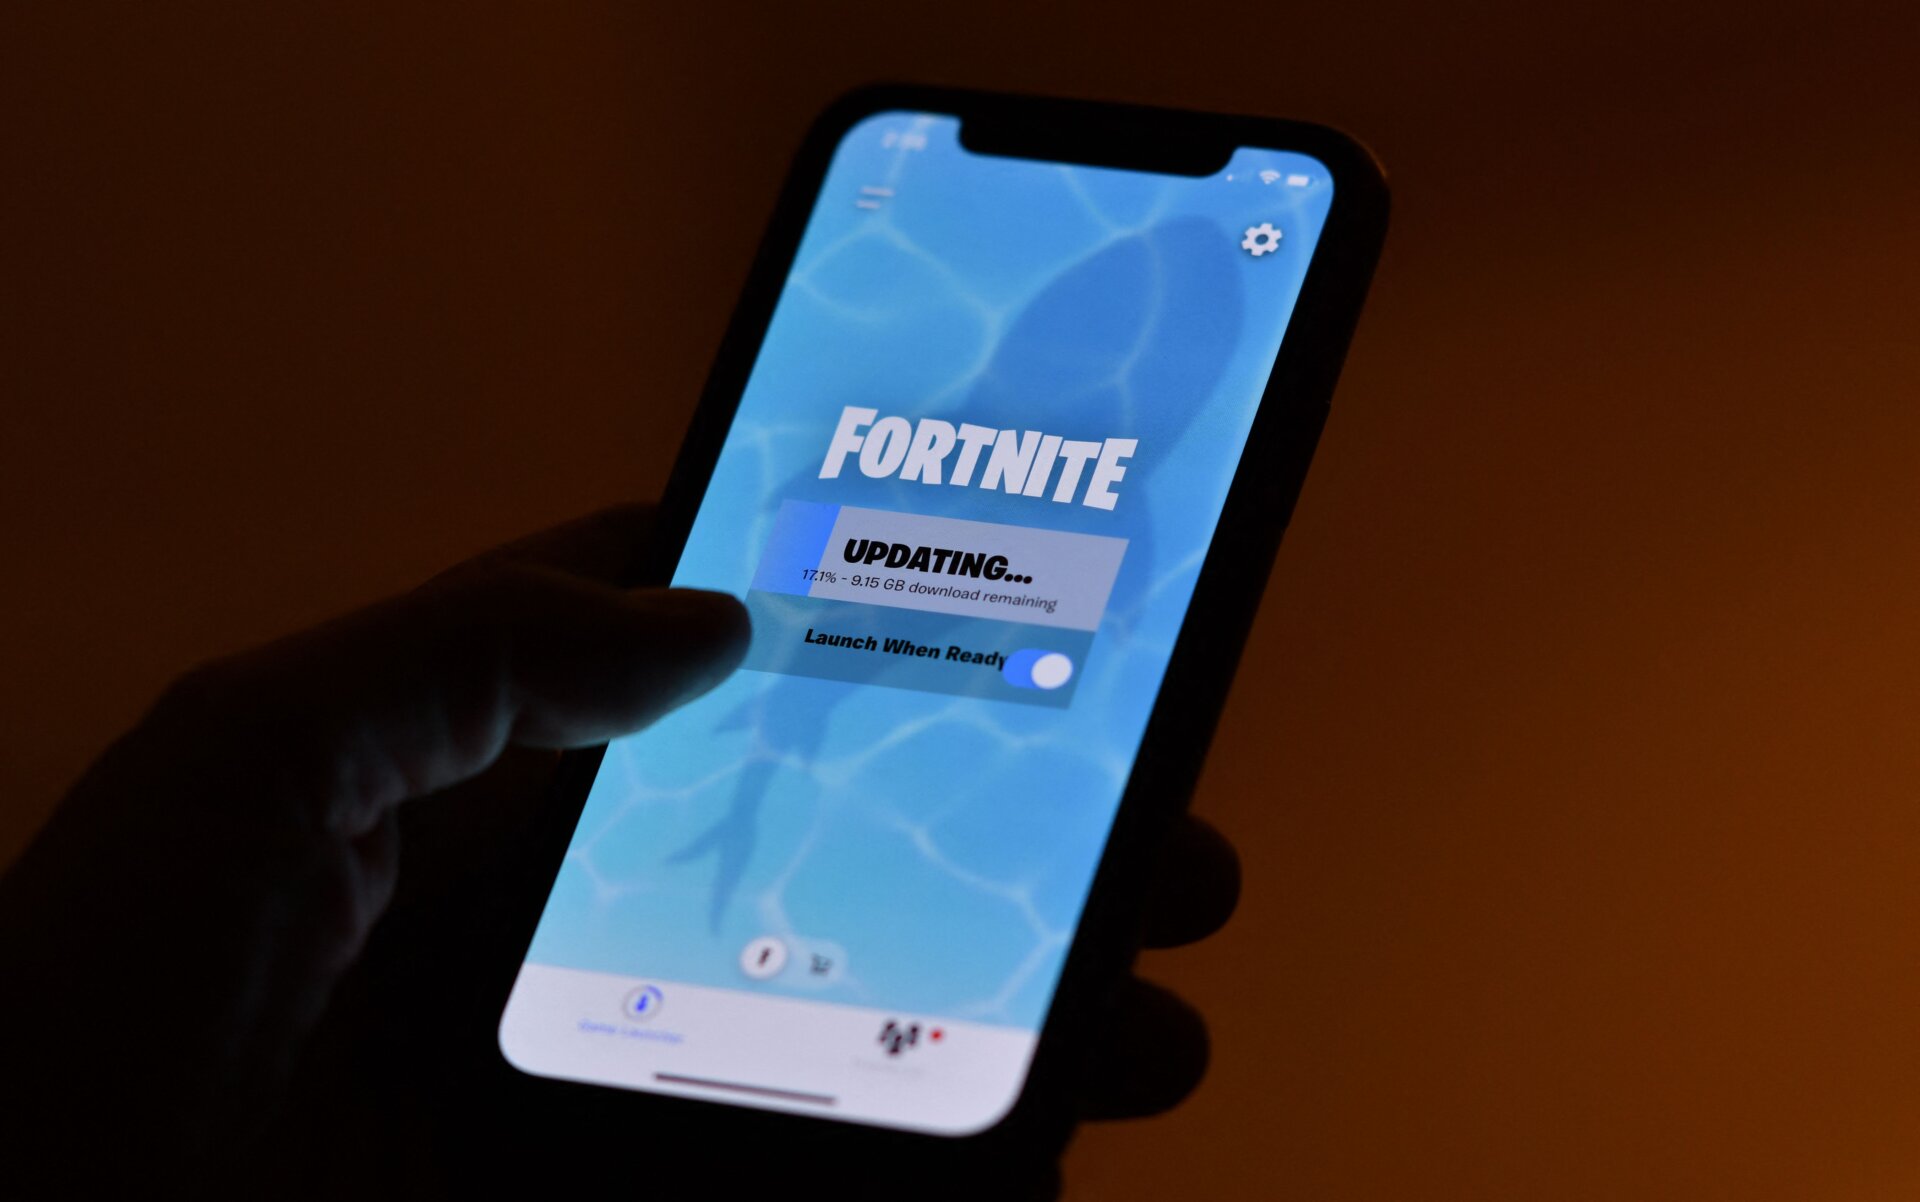 iPhone with Fortnite